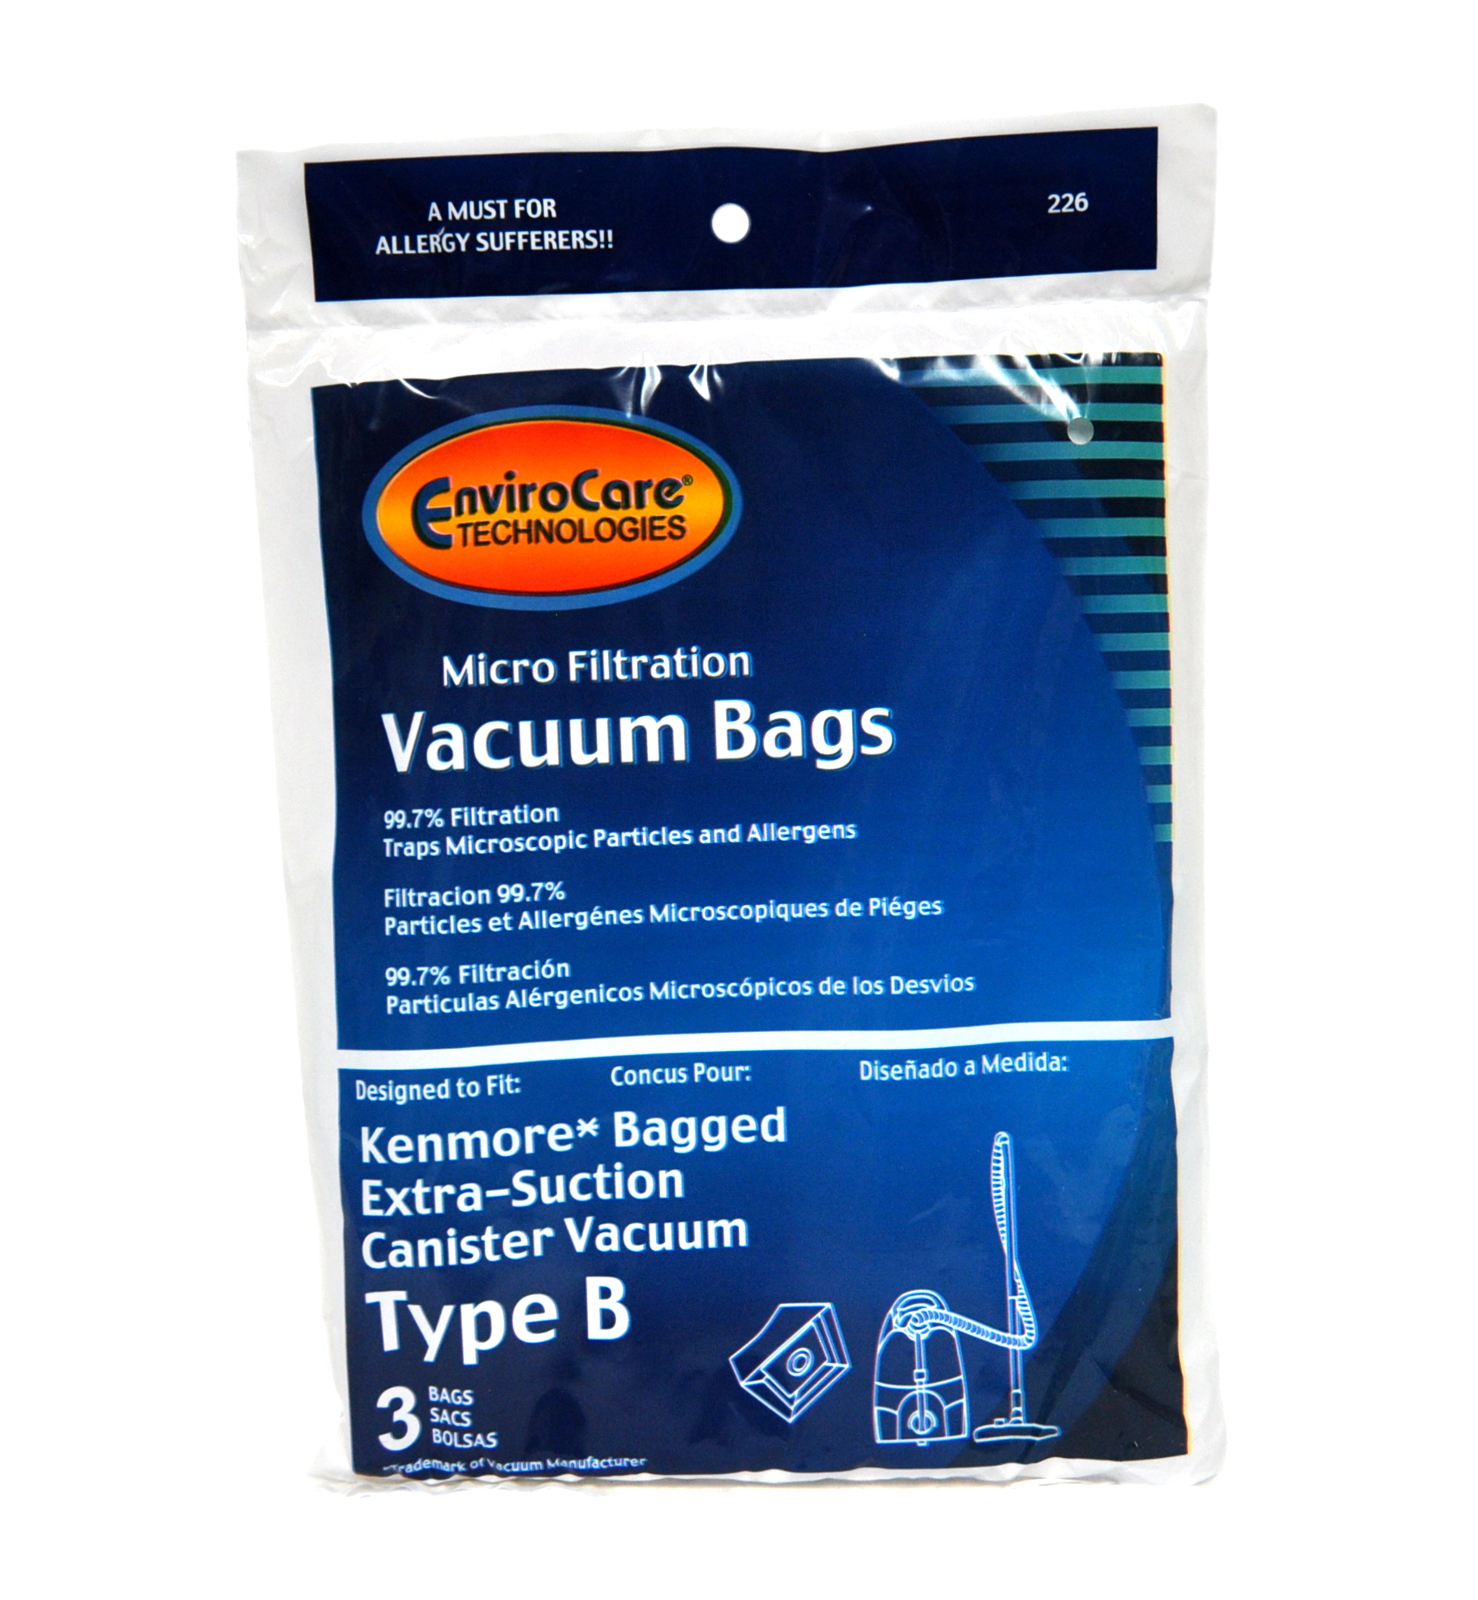 Envirocare Micro Filtration Vacuum Bags Kenmore Style B Canister Vacuums